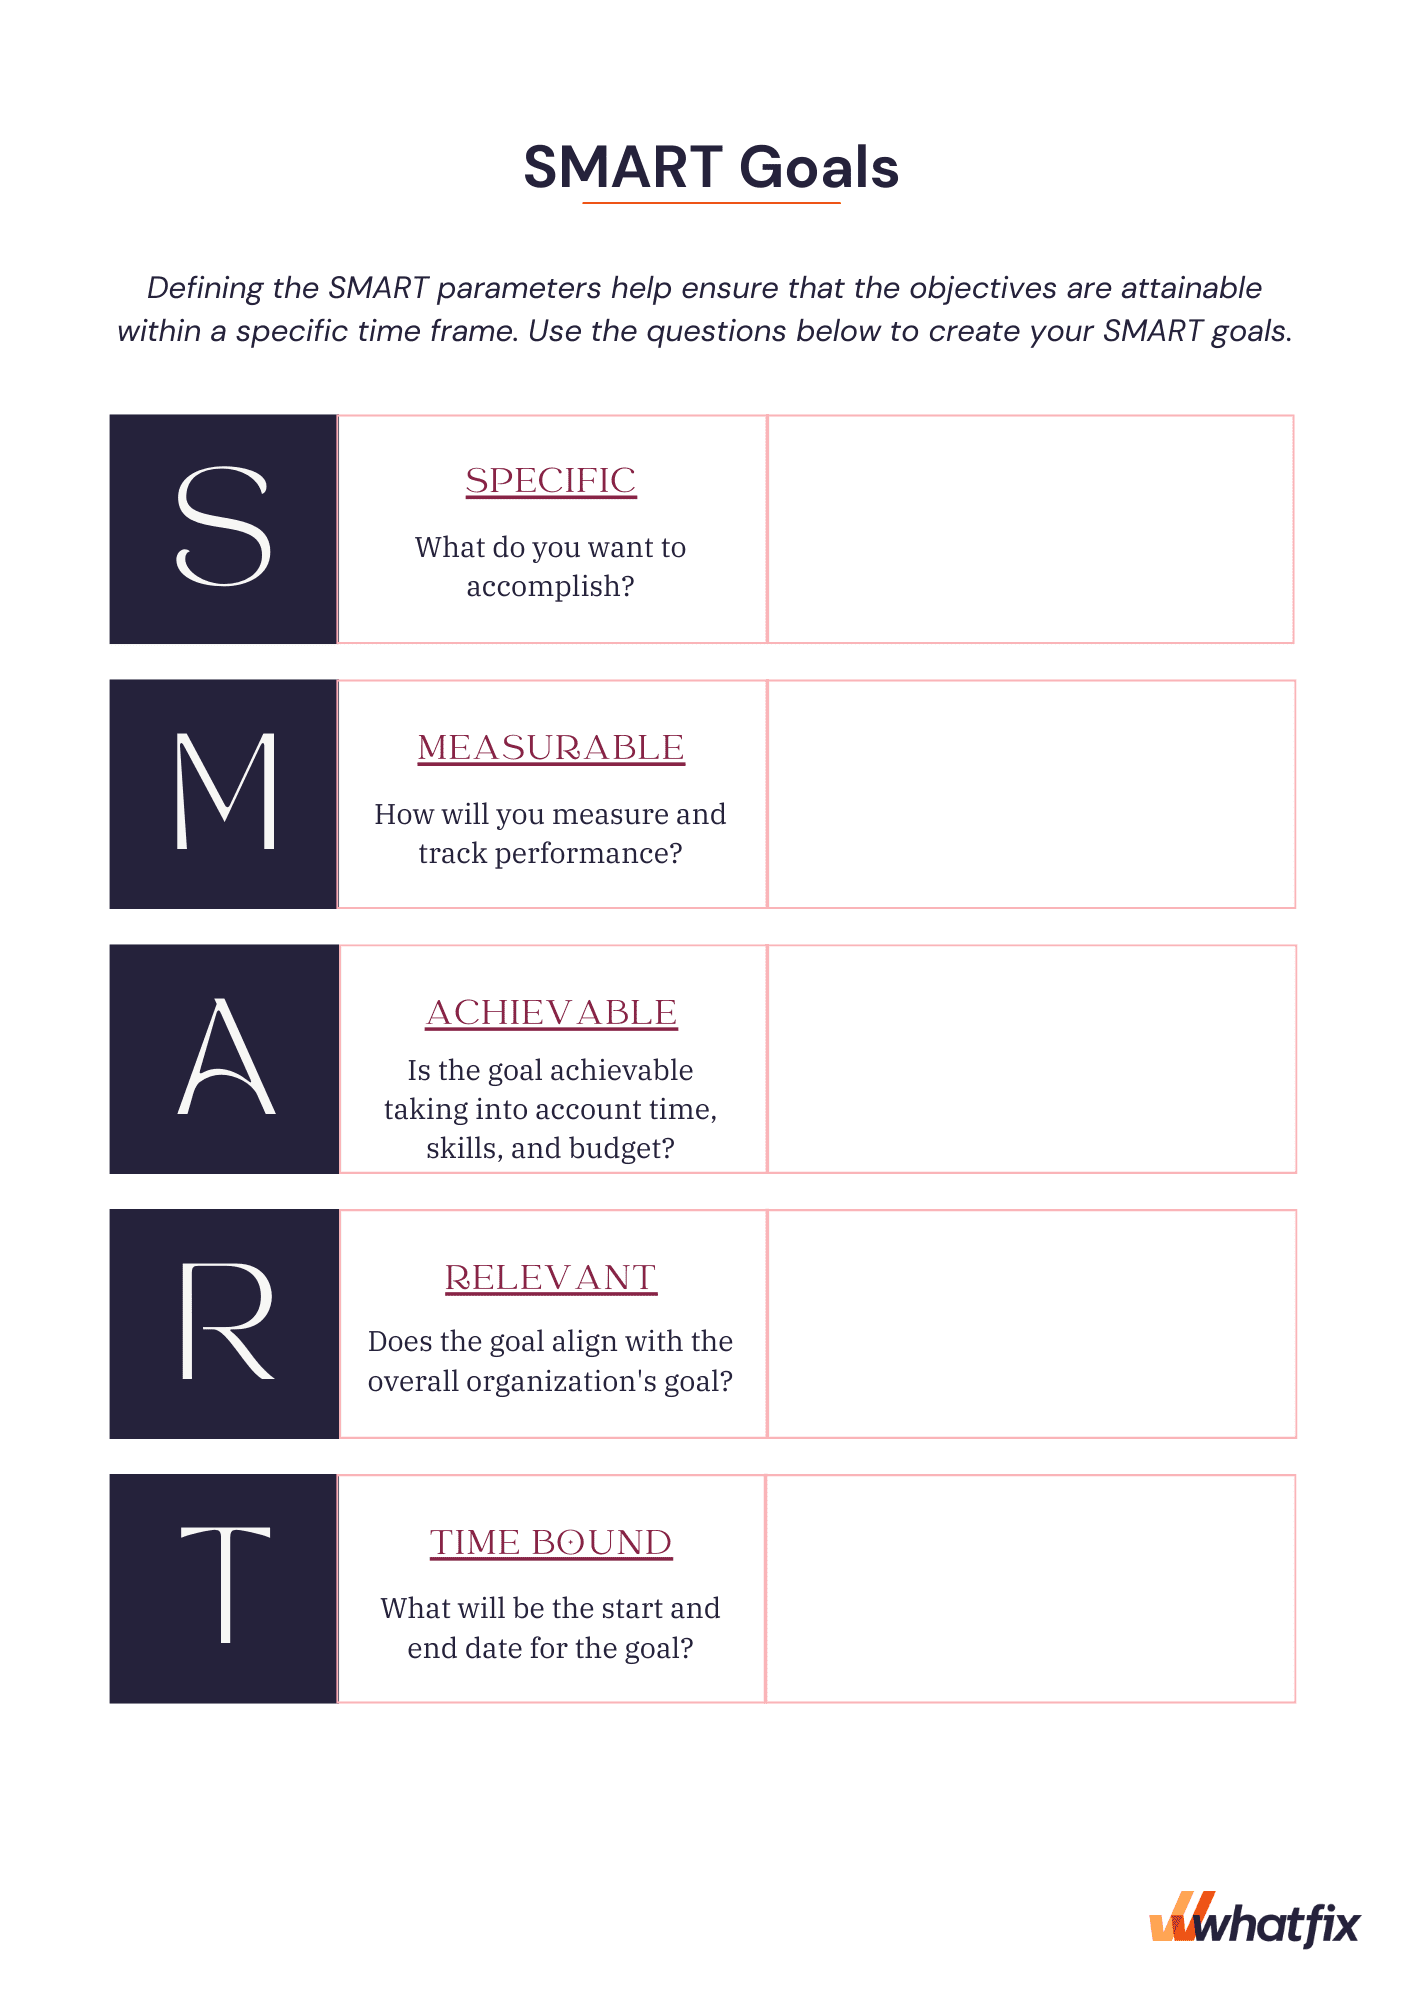 How To Write SMART Goals in 5 Steps (With Examples)